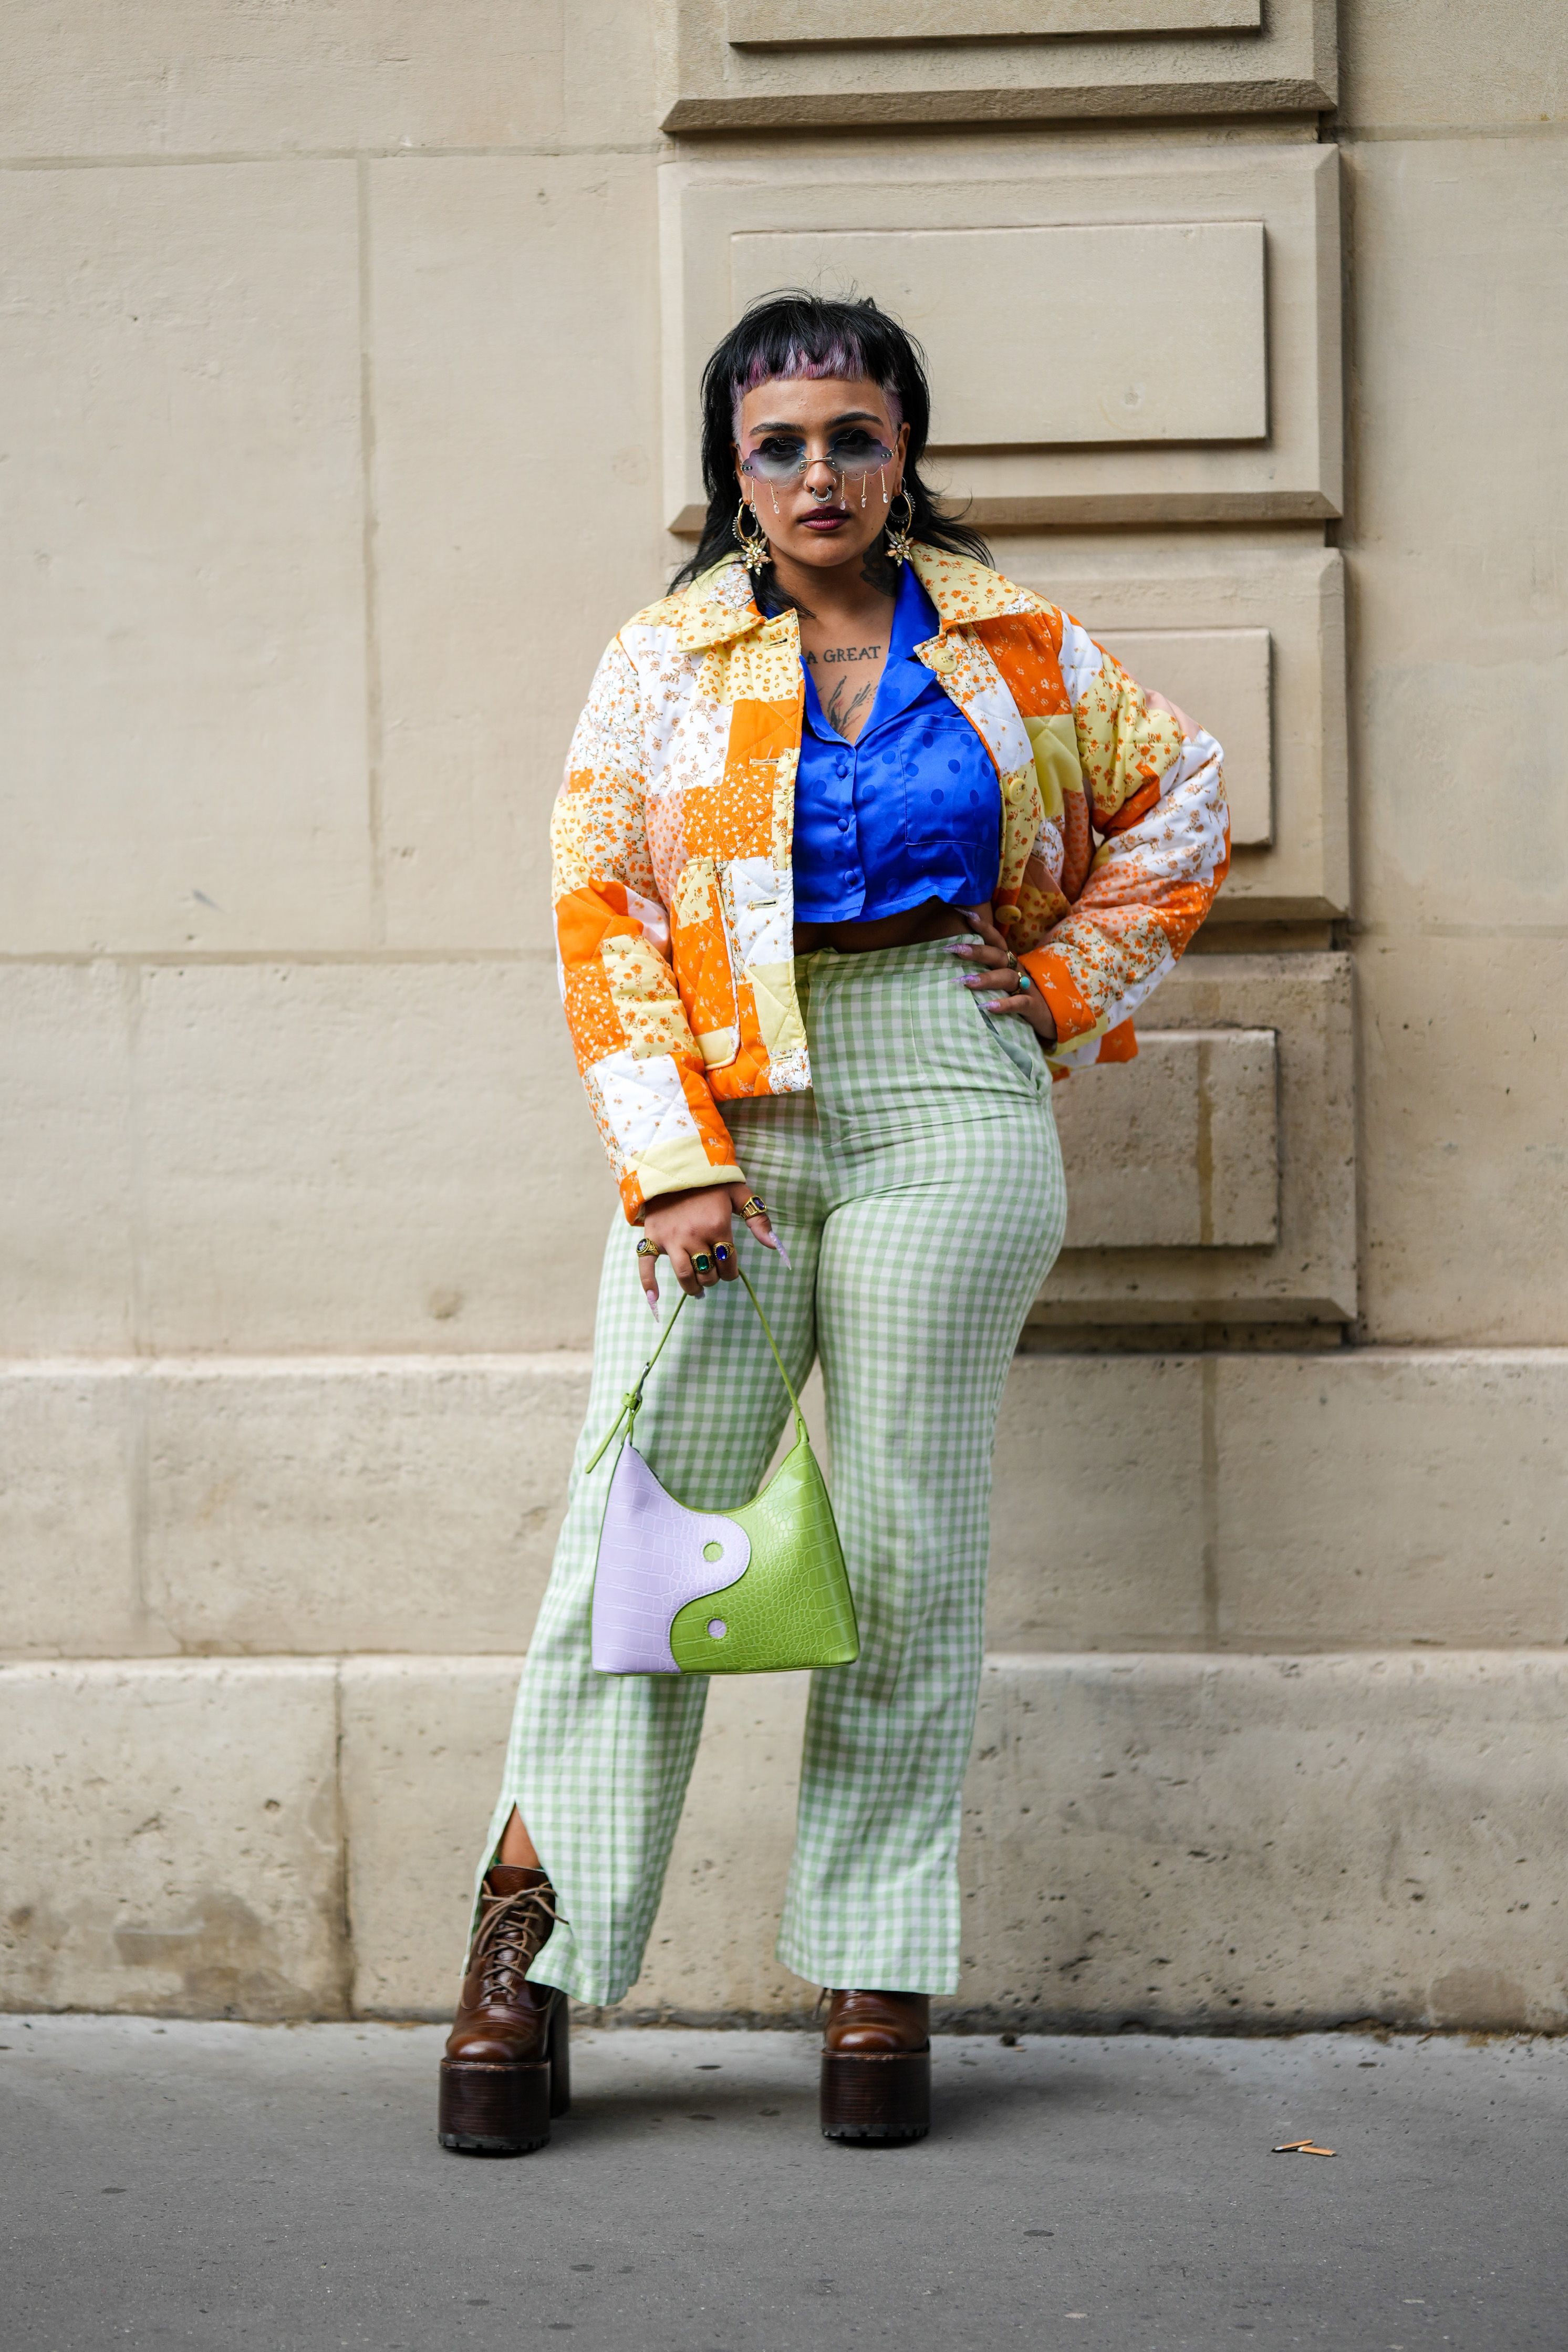 Street Style Fashion with Fantastic Mirrored Sunglasses - Gorgeous